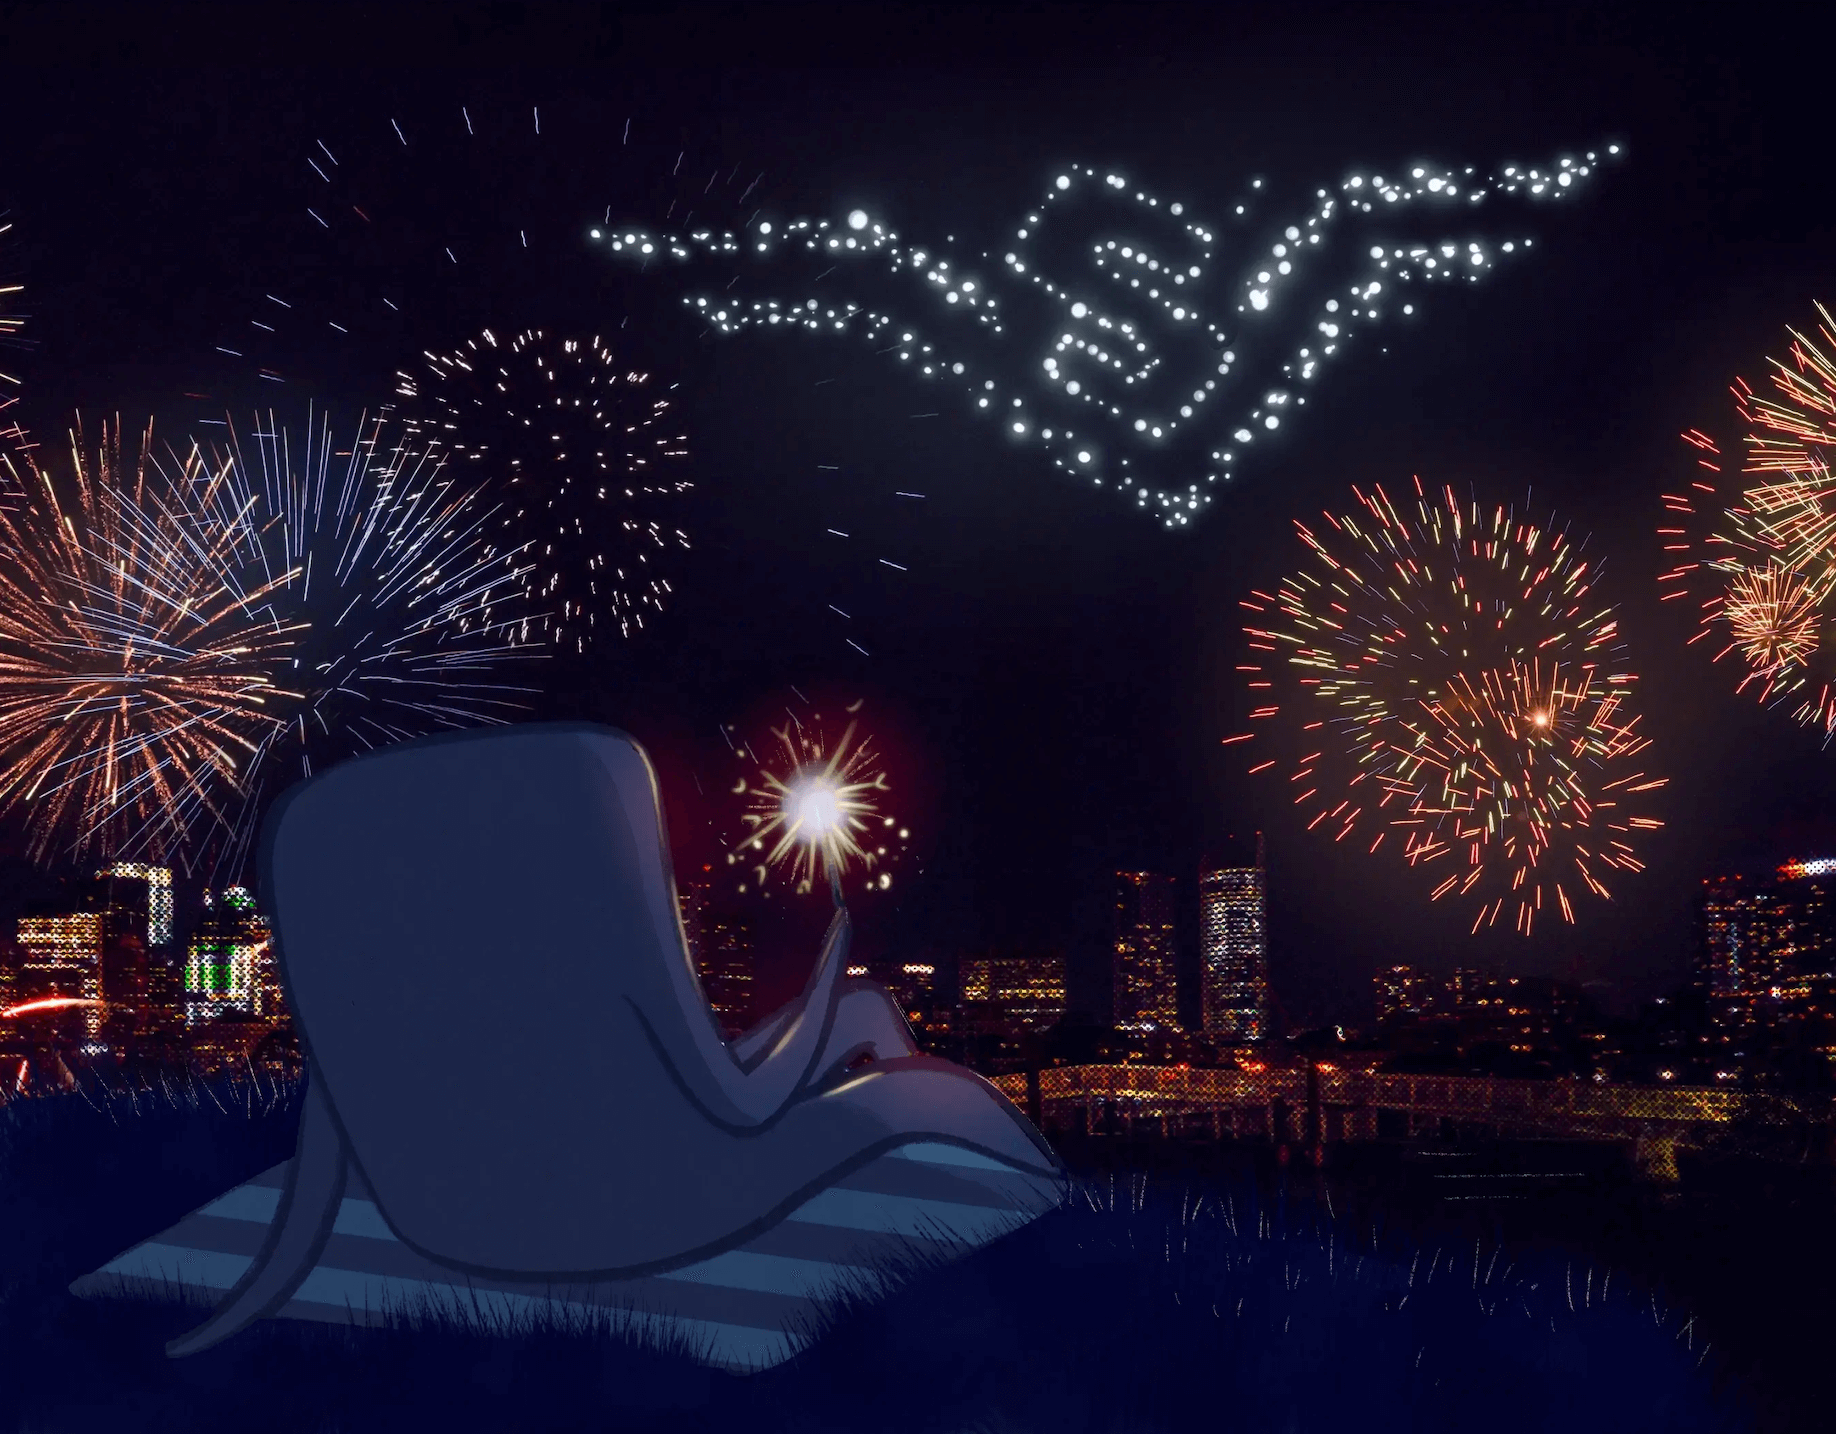 Shocky watching fireworks and looking cozy 